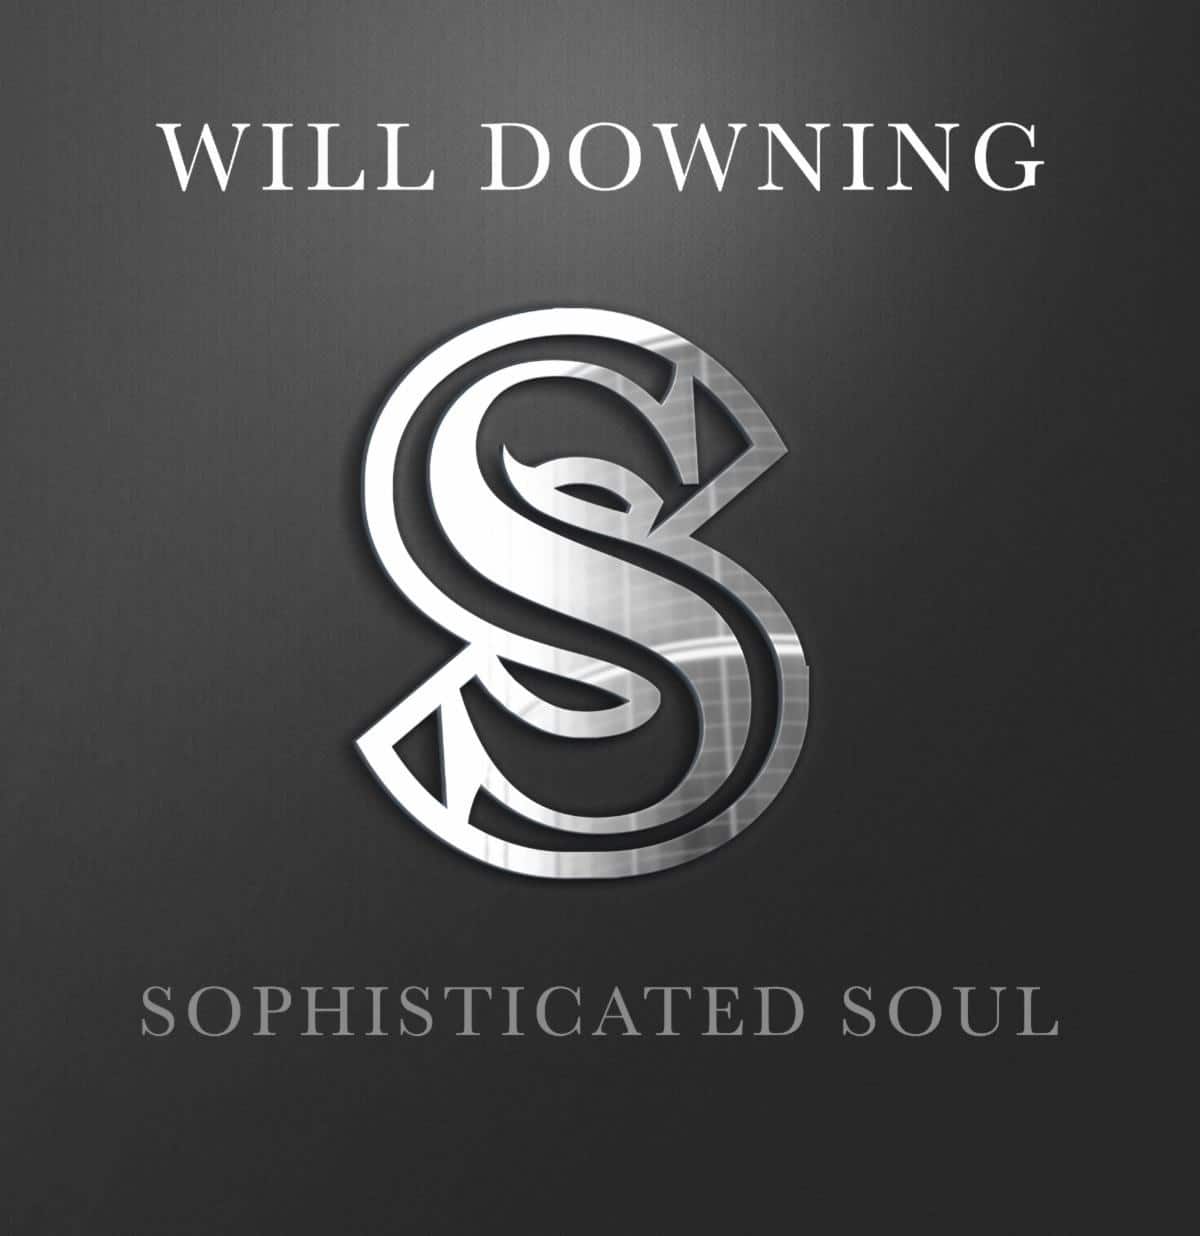 Will Downing - Sophisticated Soul (logo)